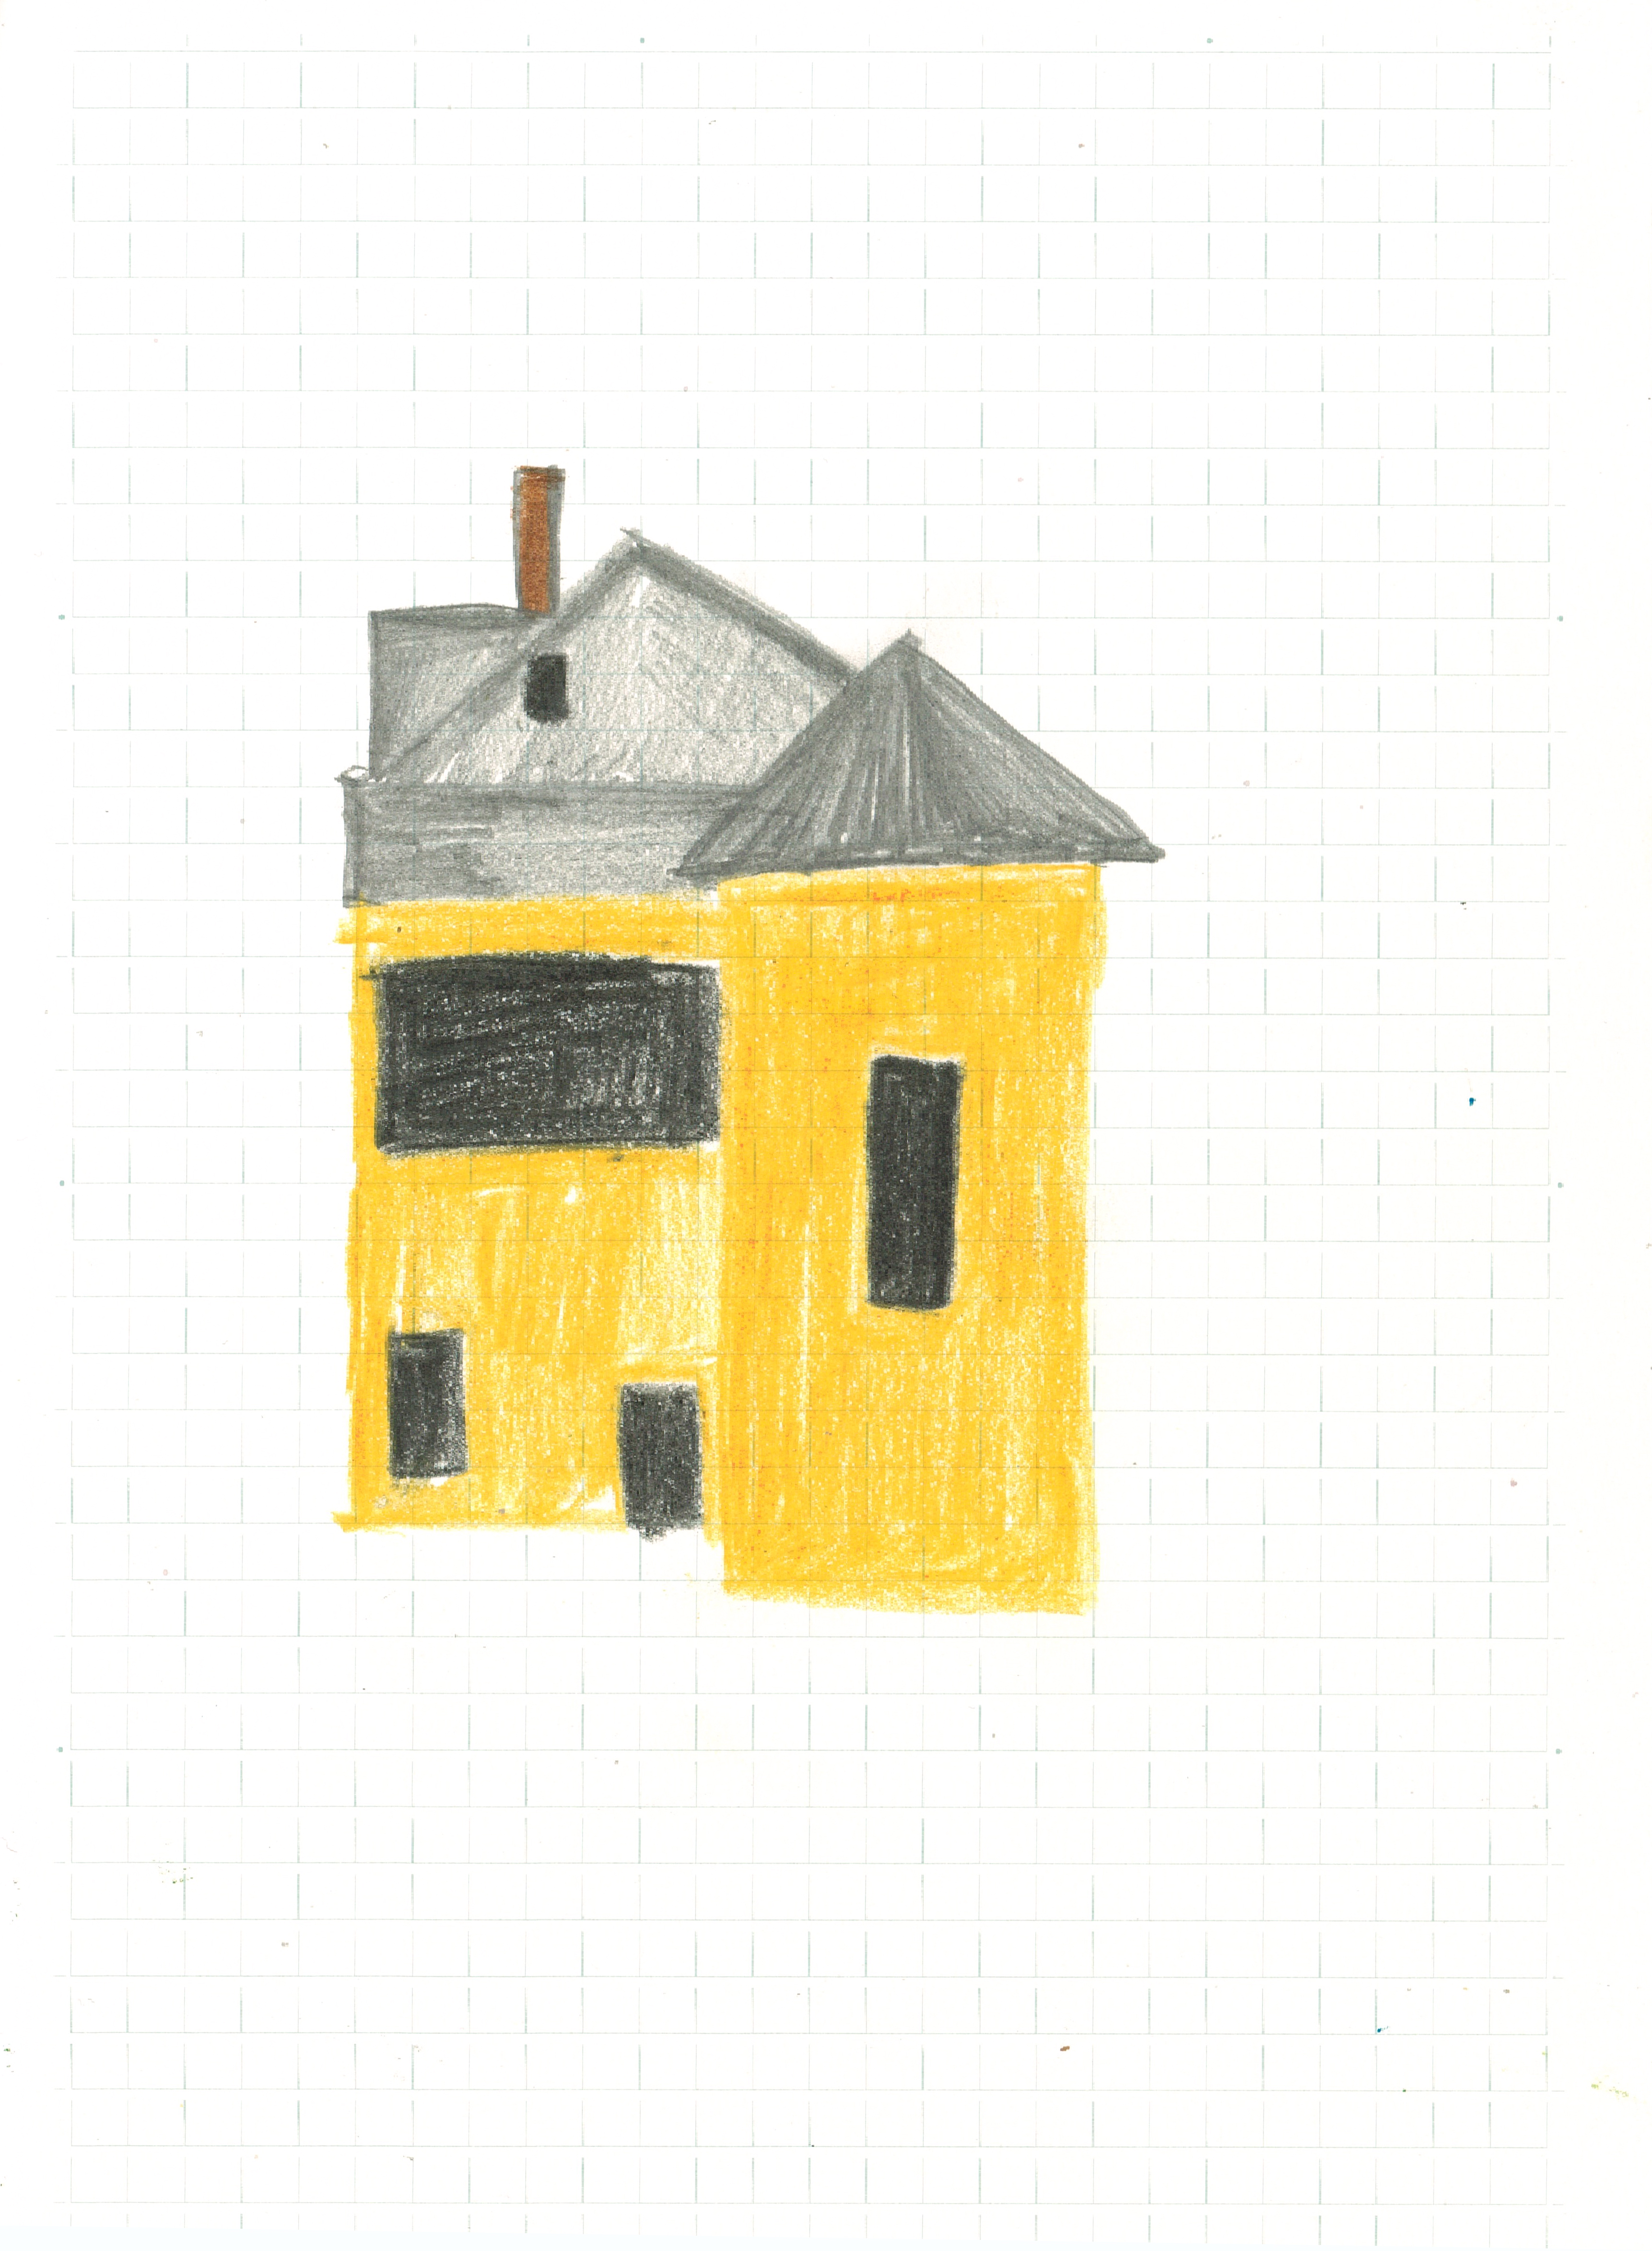 drawing of a house in yellow with grey roof and black windows